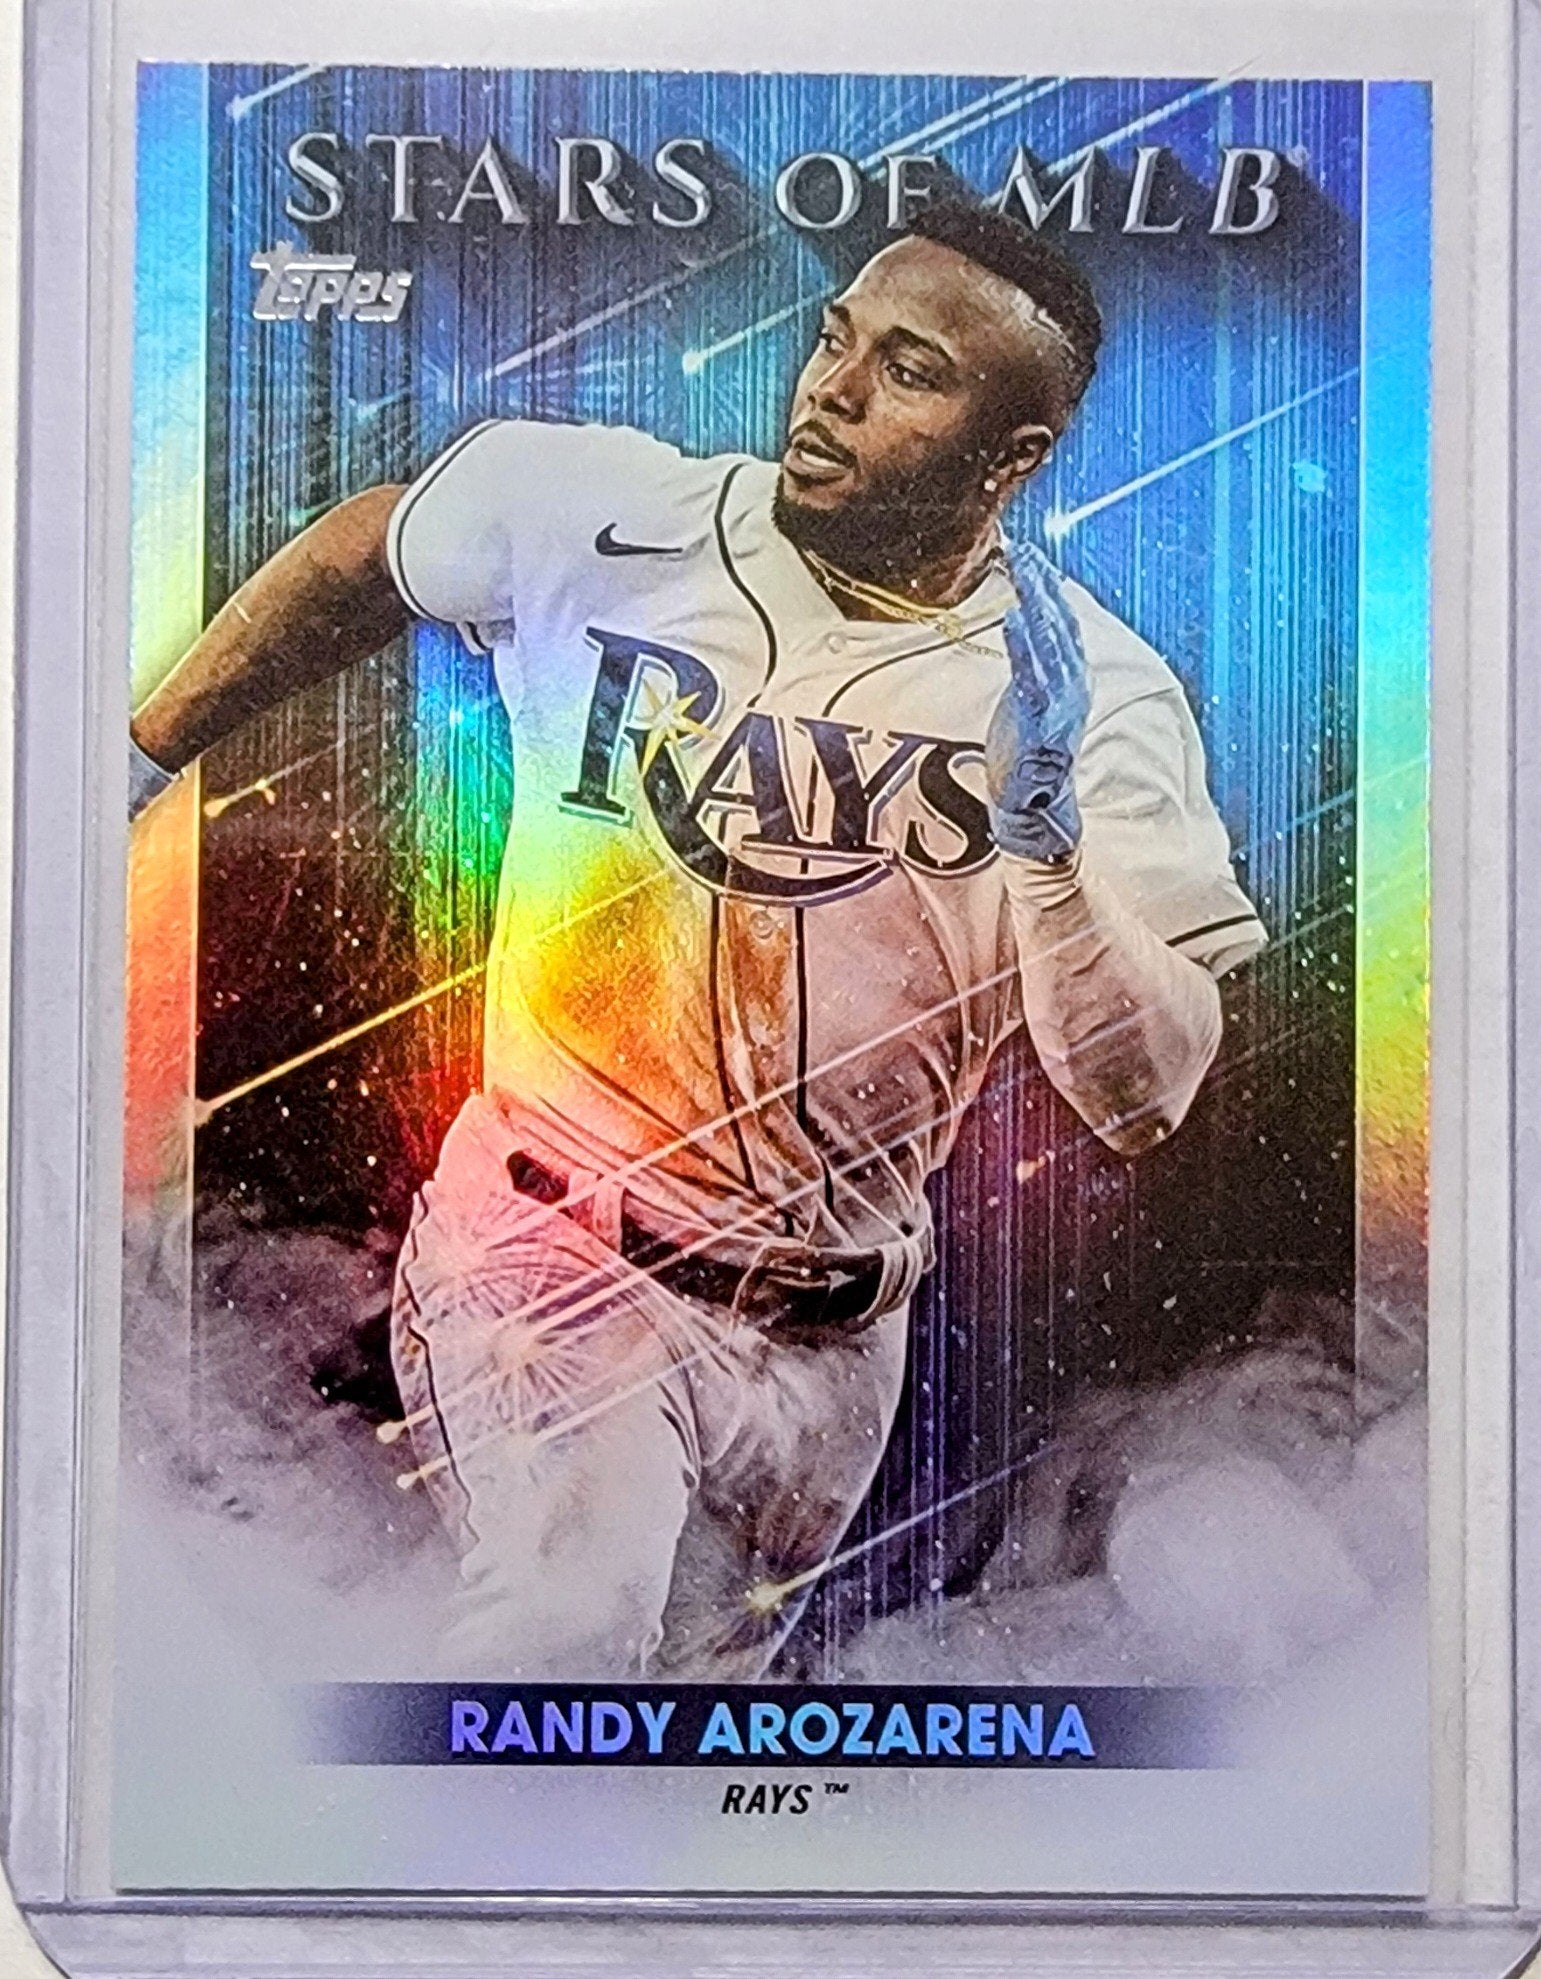 2022 Topps Series 2 Randy Arozerena Stars of the MLB Insert Baseball Card AVM1 simple Xclusive Collectibles   